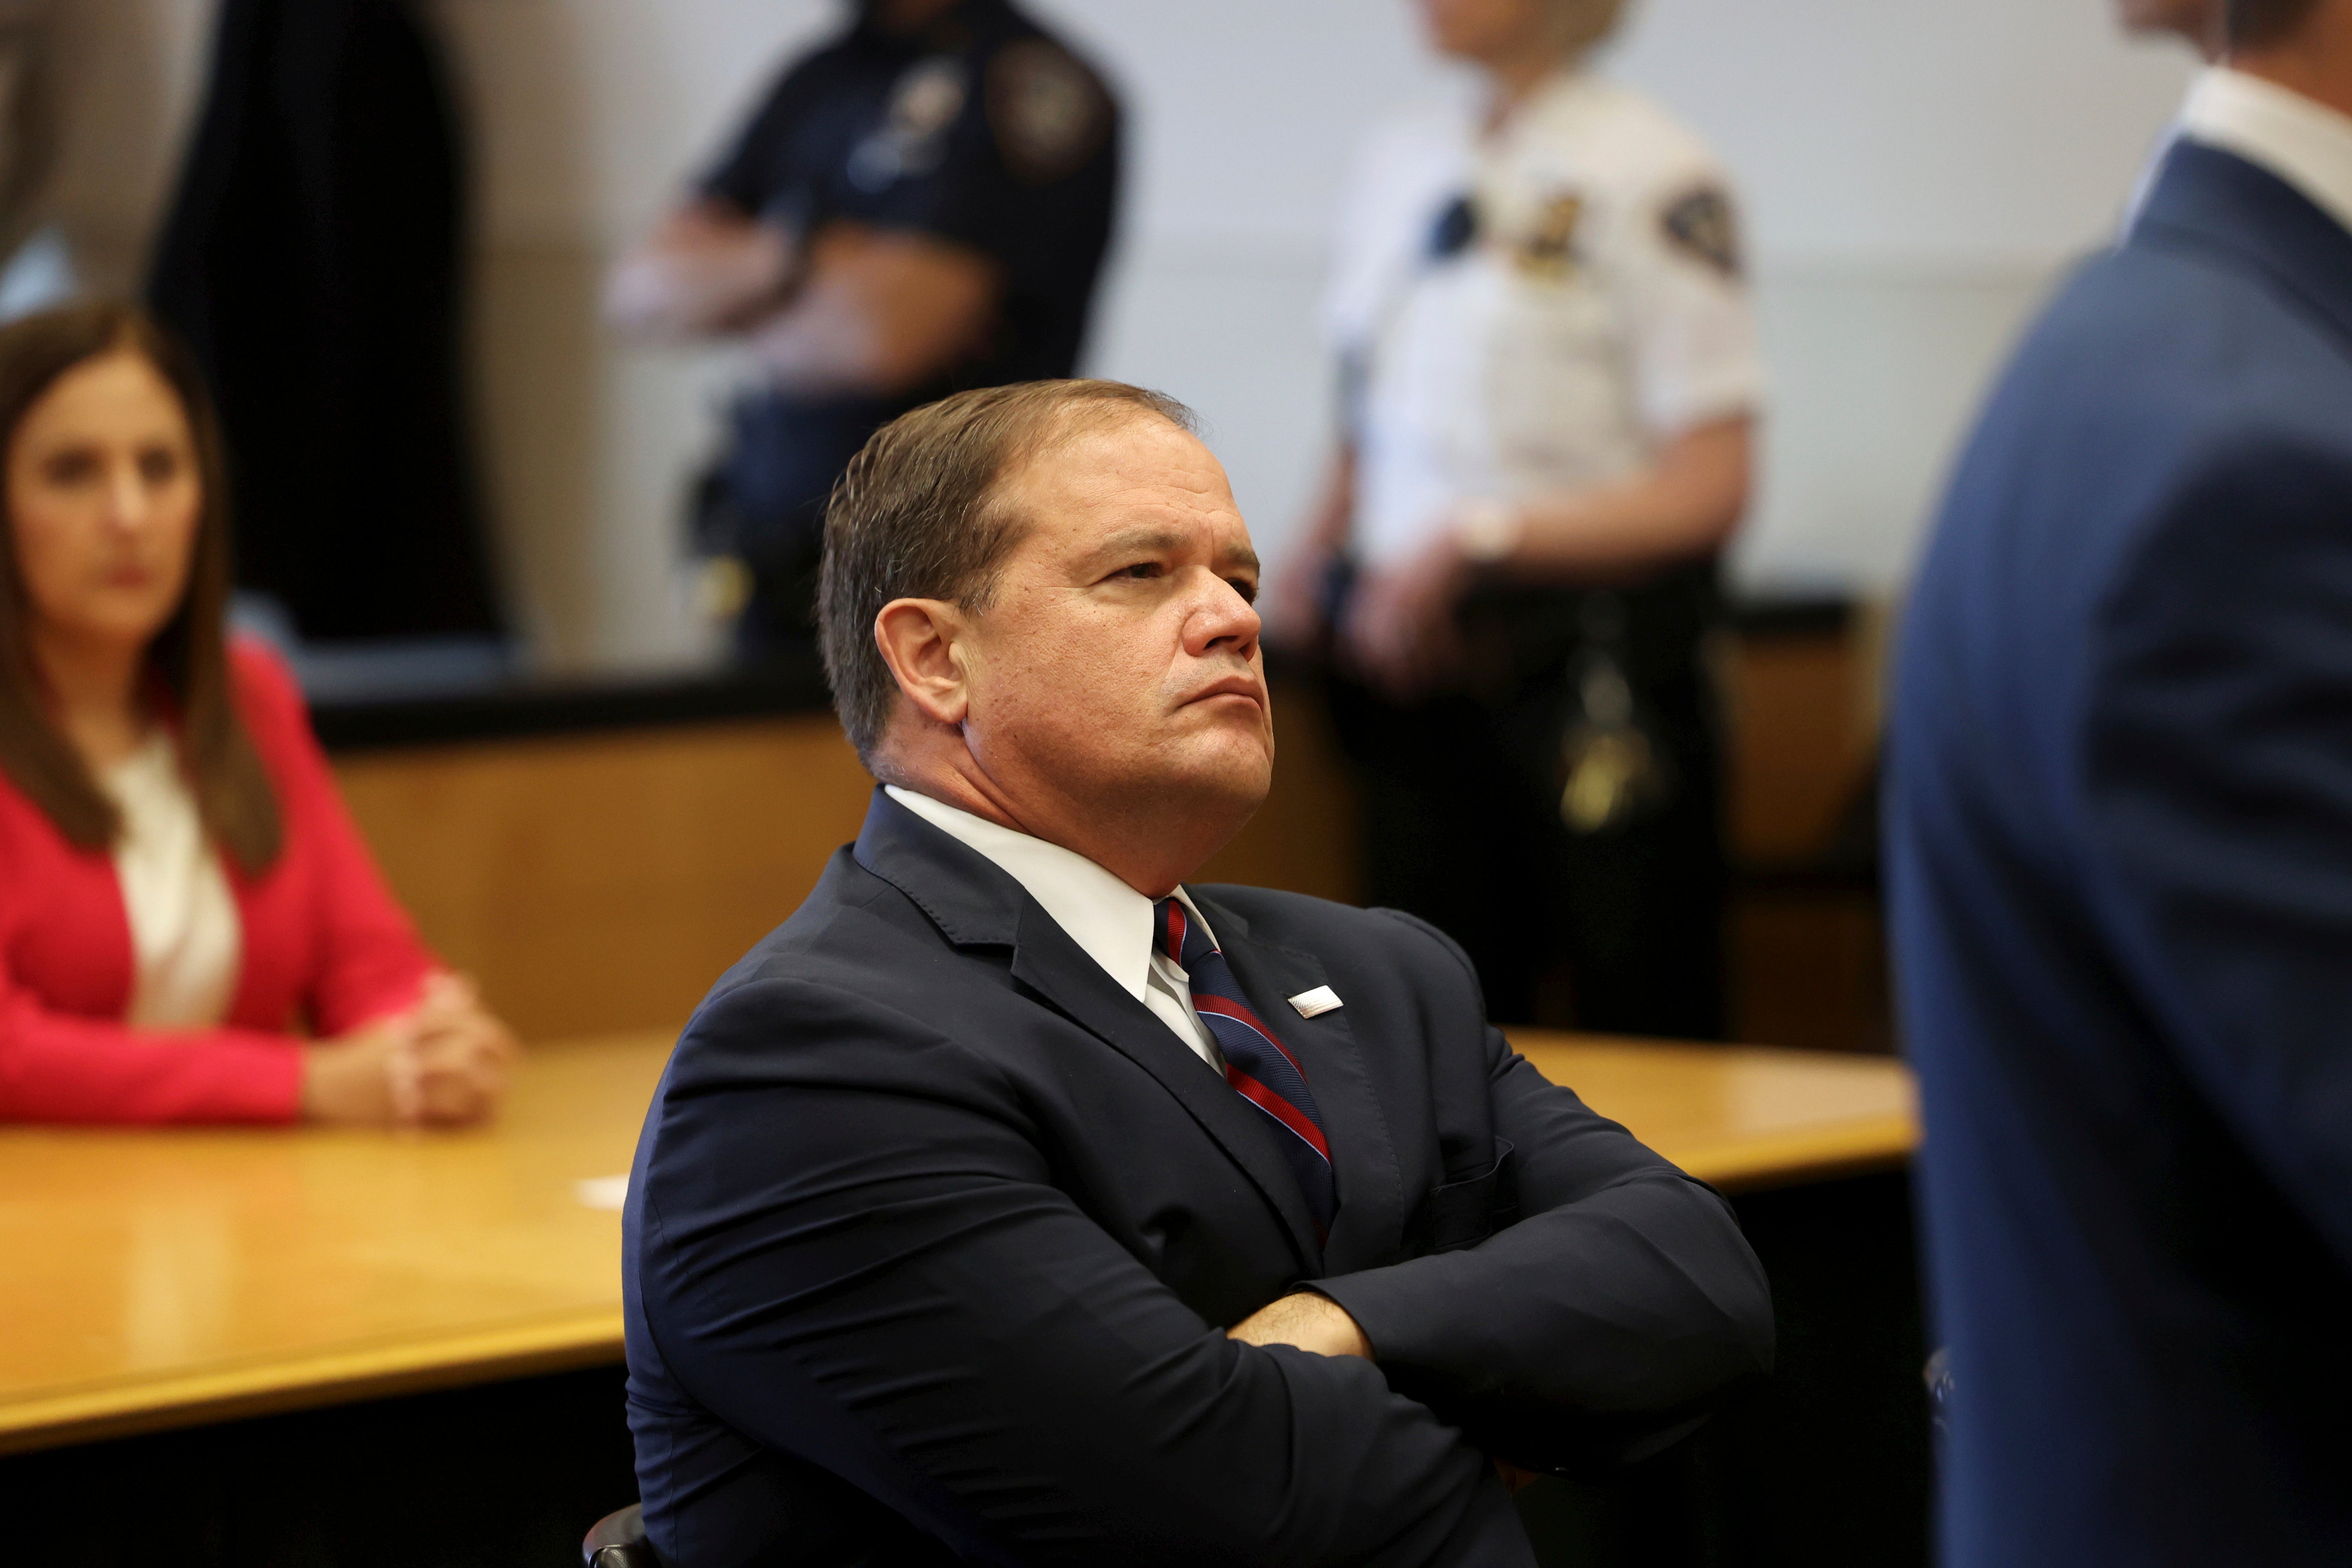 Suffolk County District Attorney Ray Tierney looks on during Rex Heuermann’s court appearance